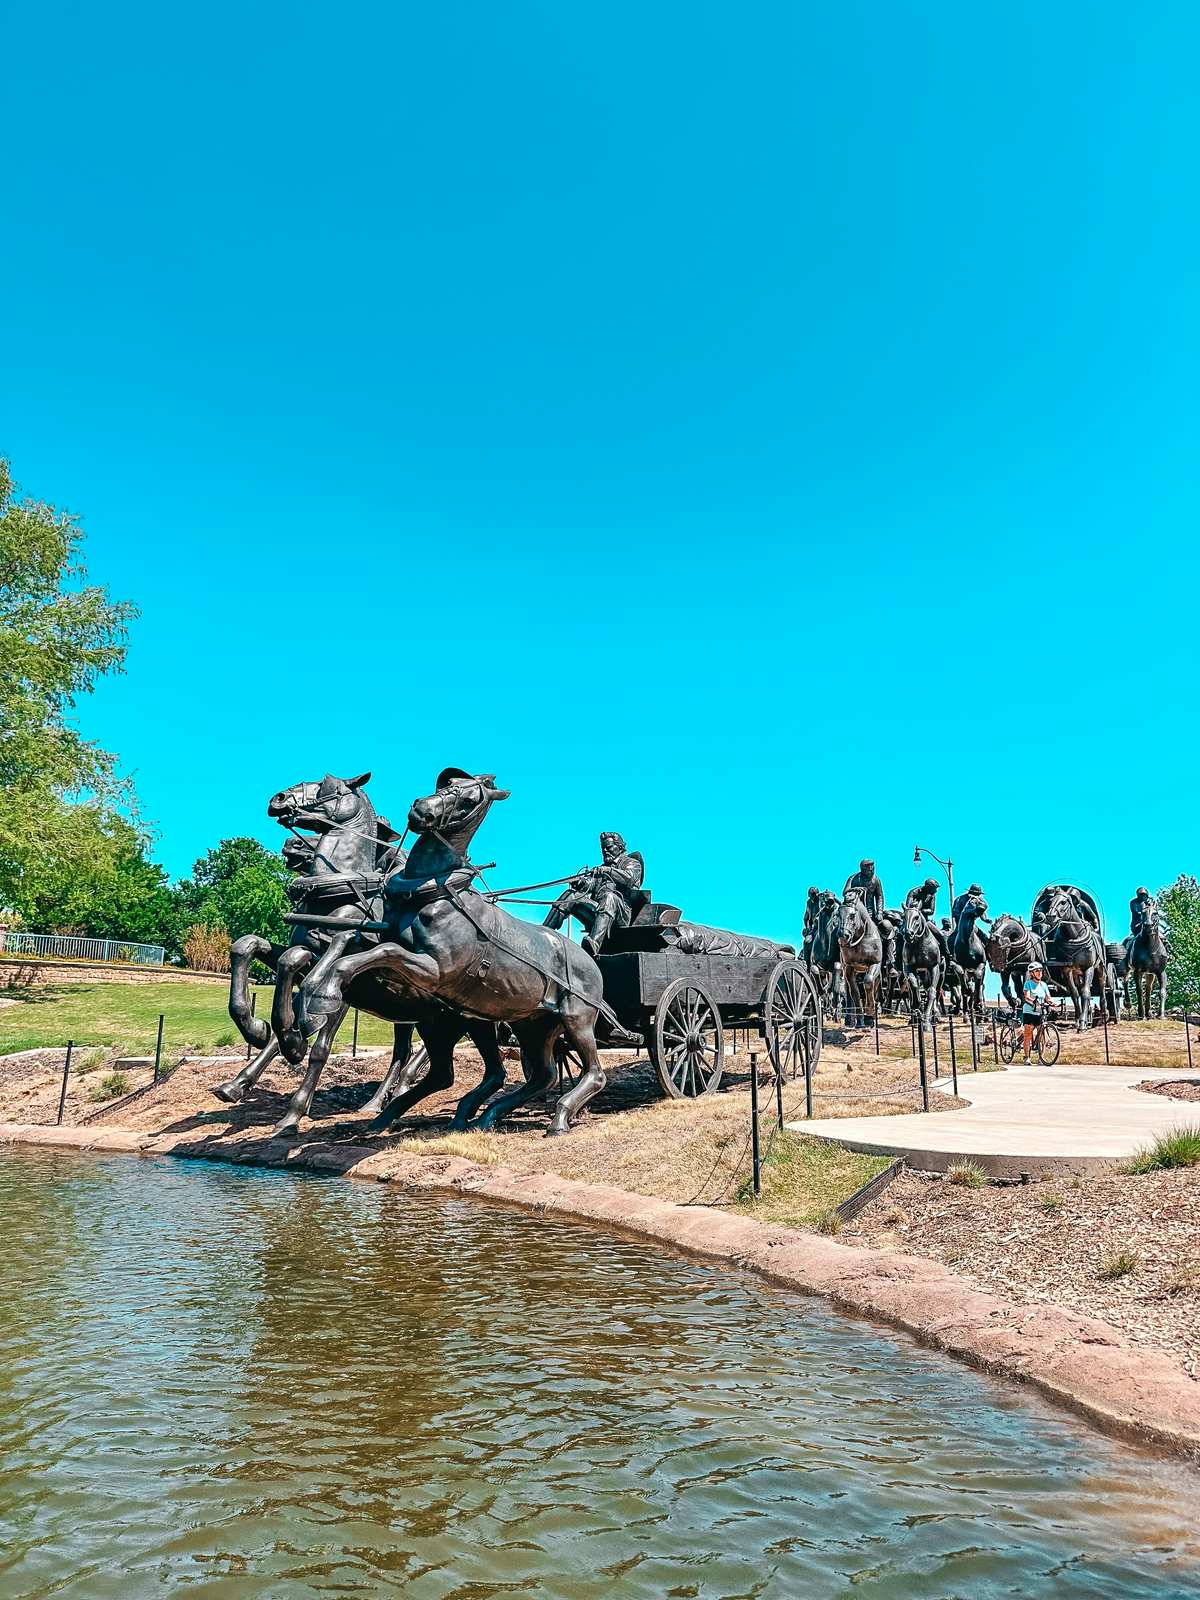 Statues along the Bricktown Water Taxi route in Oklahoma City